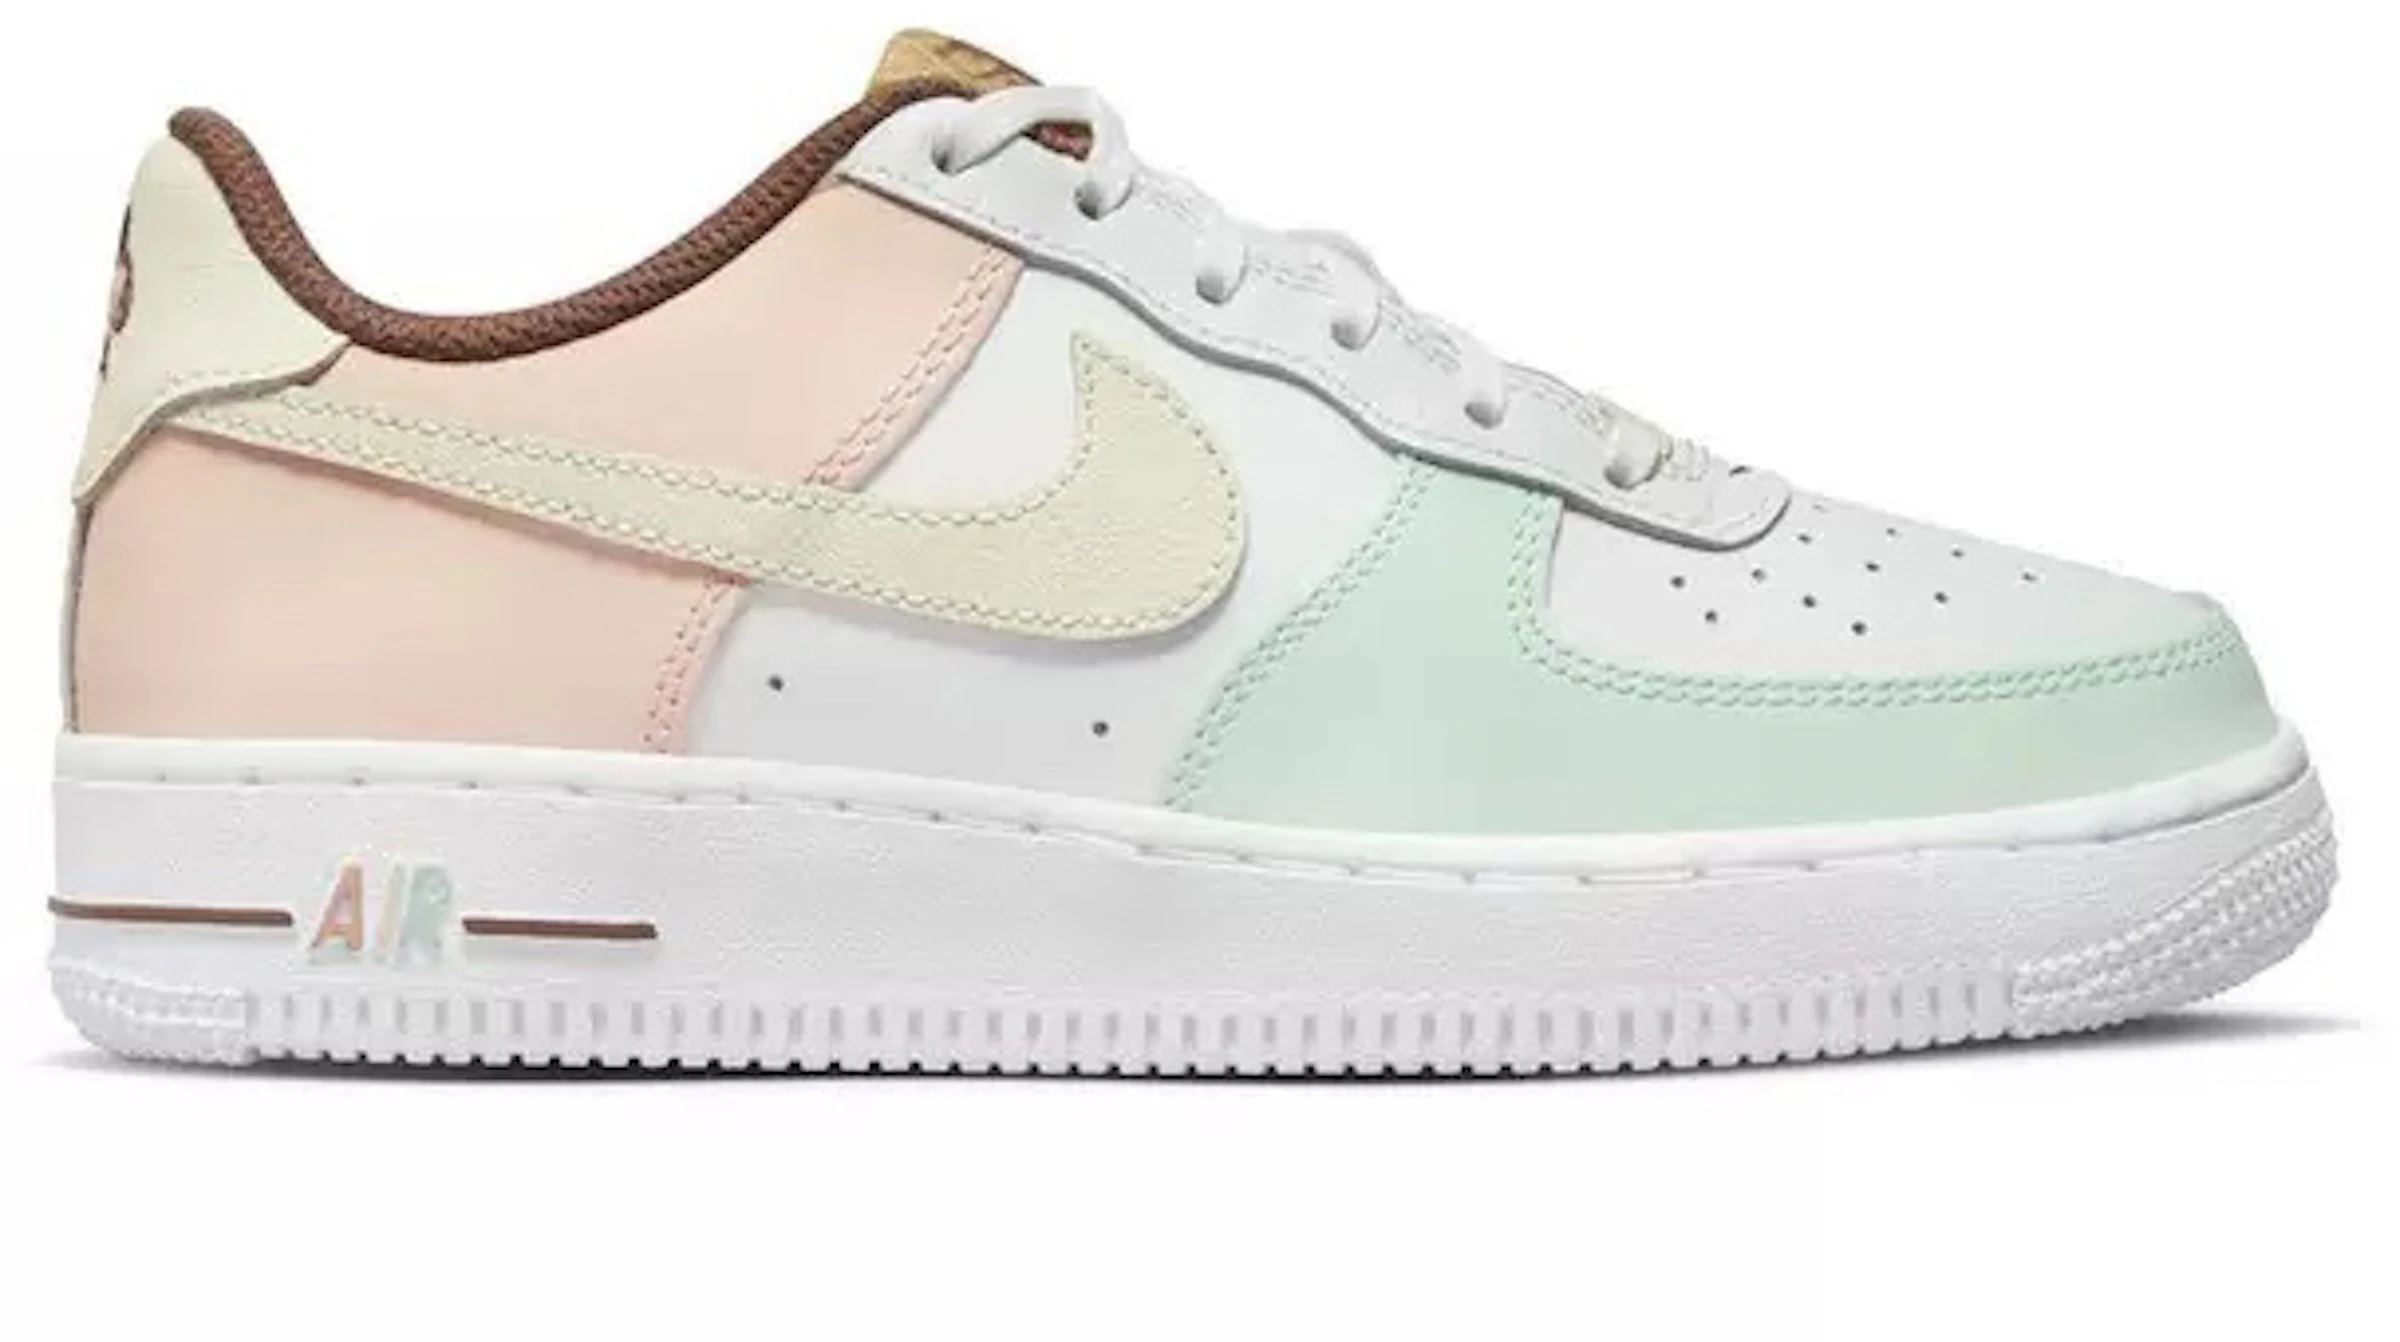 Nike Air Force 1 Low LV8 Ice (GS) - DX3727-100 - ES